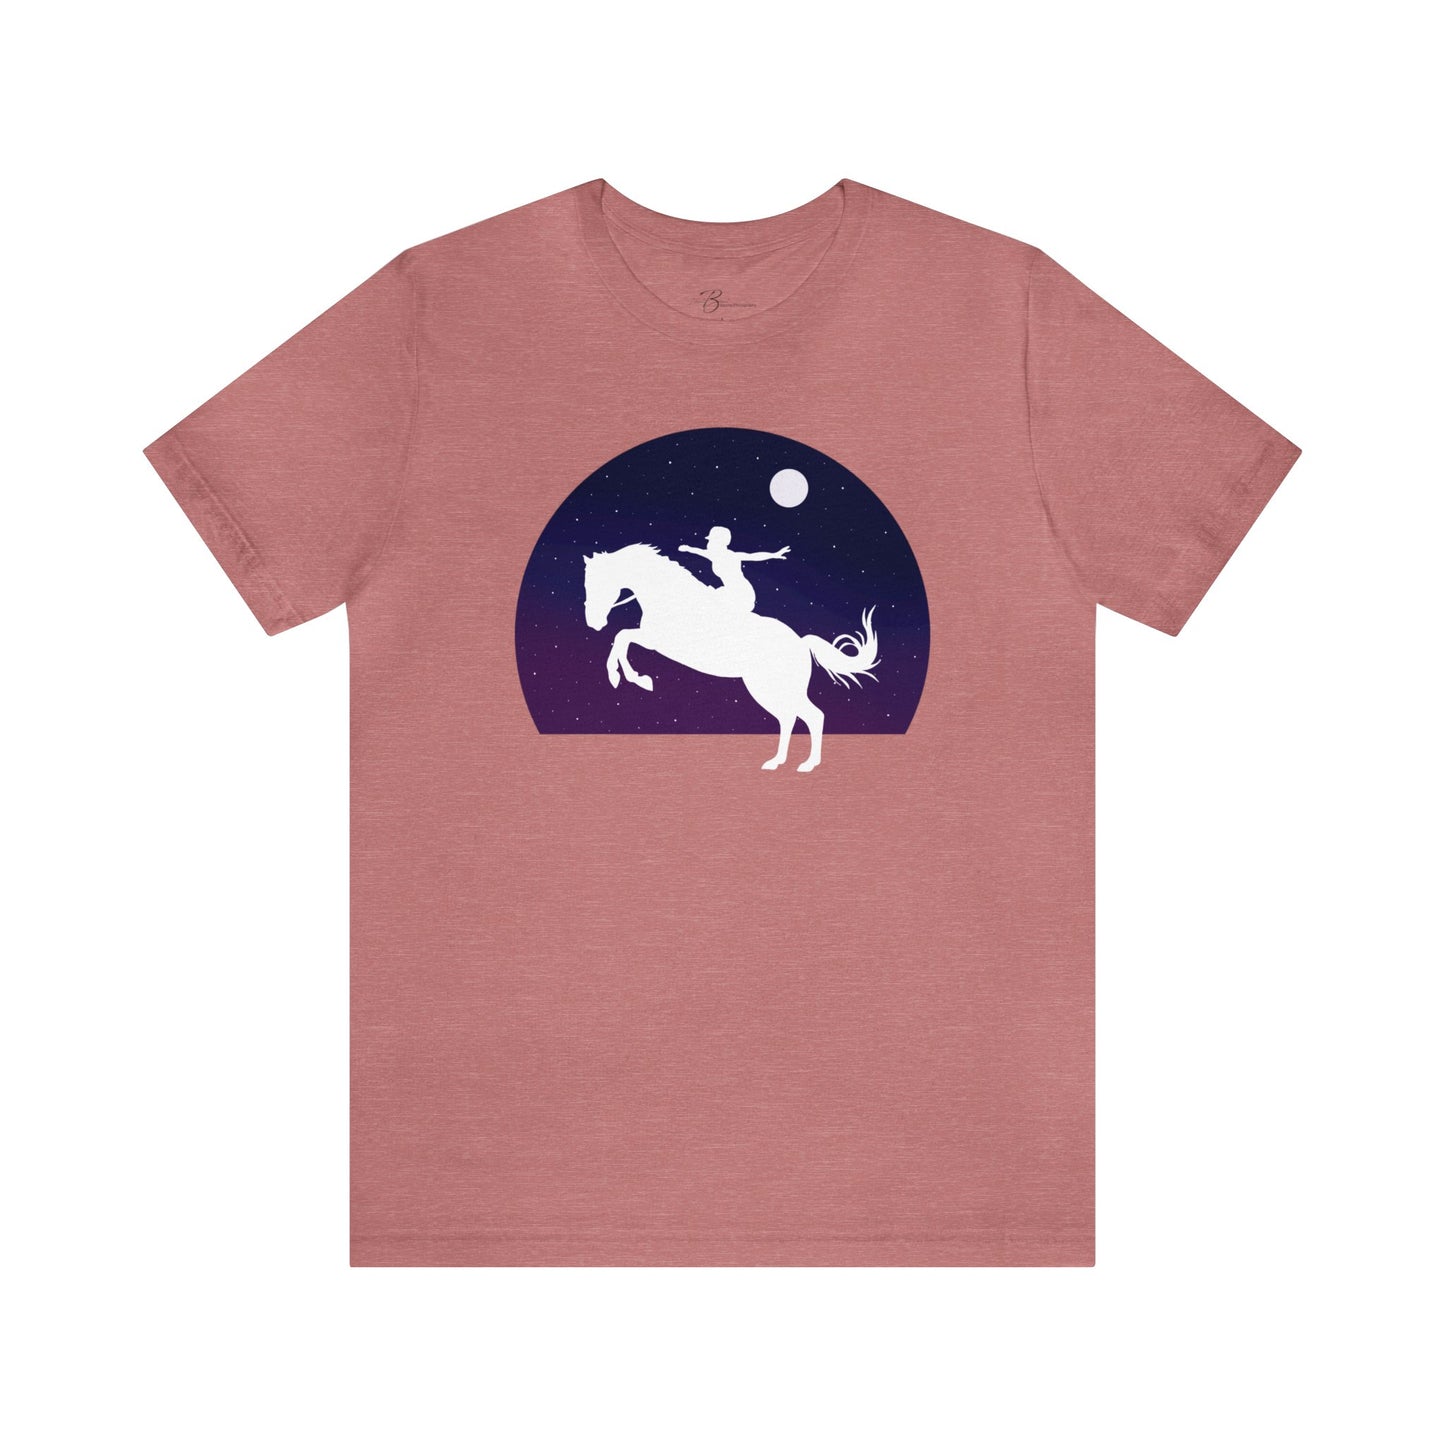 Horses Give Us Wings - Unisex Short Sleeve Jersey Tee